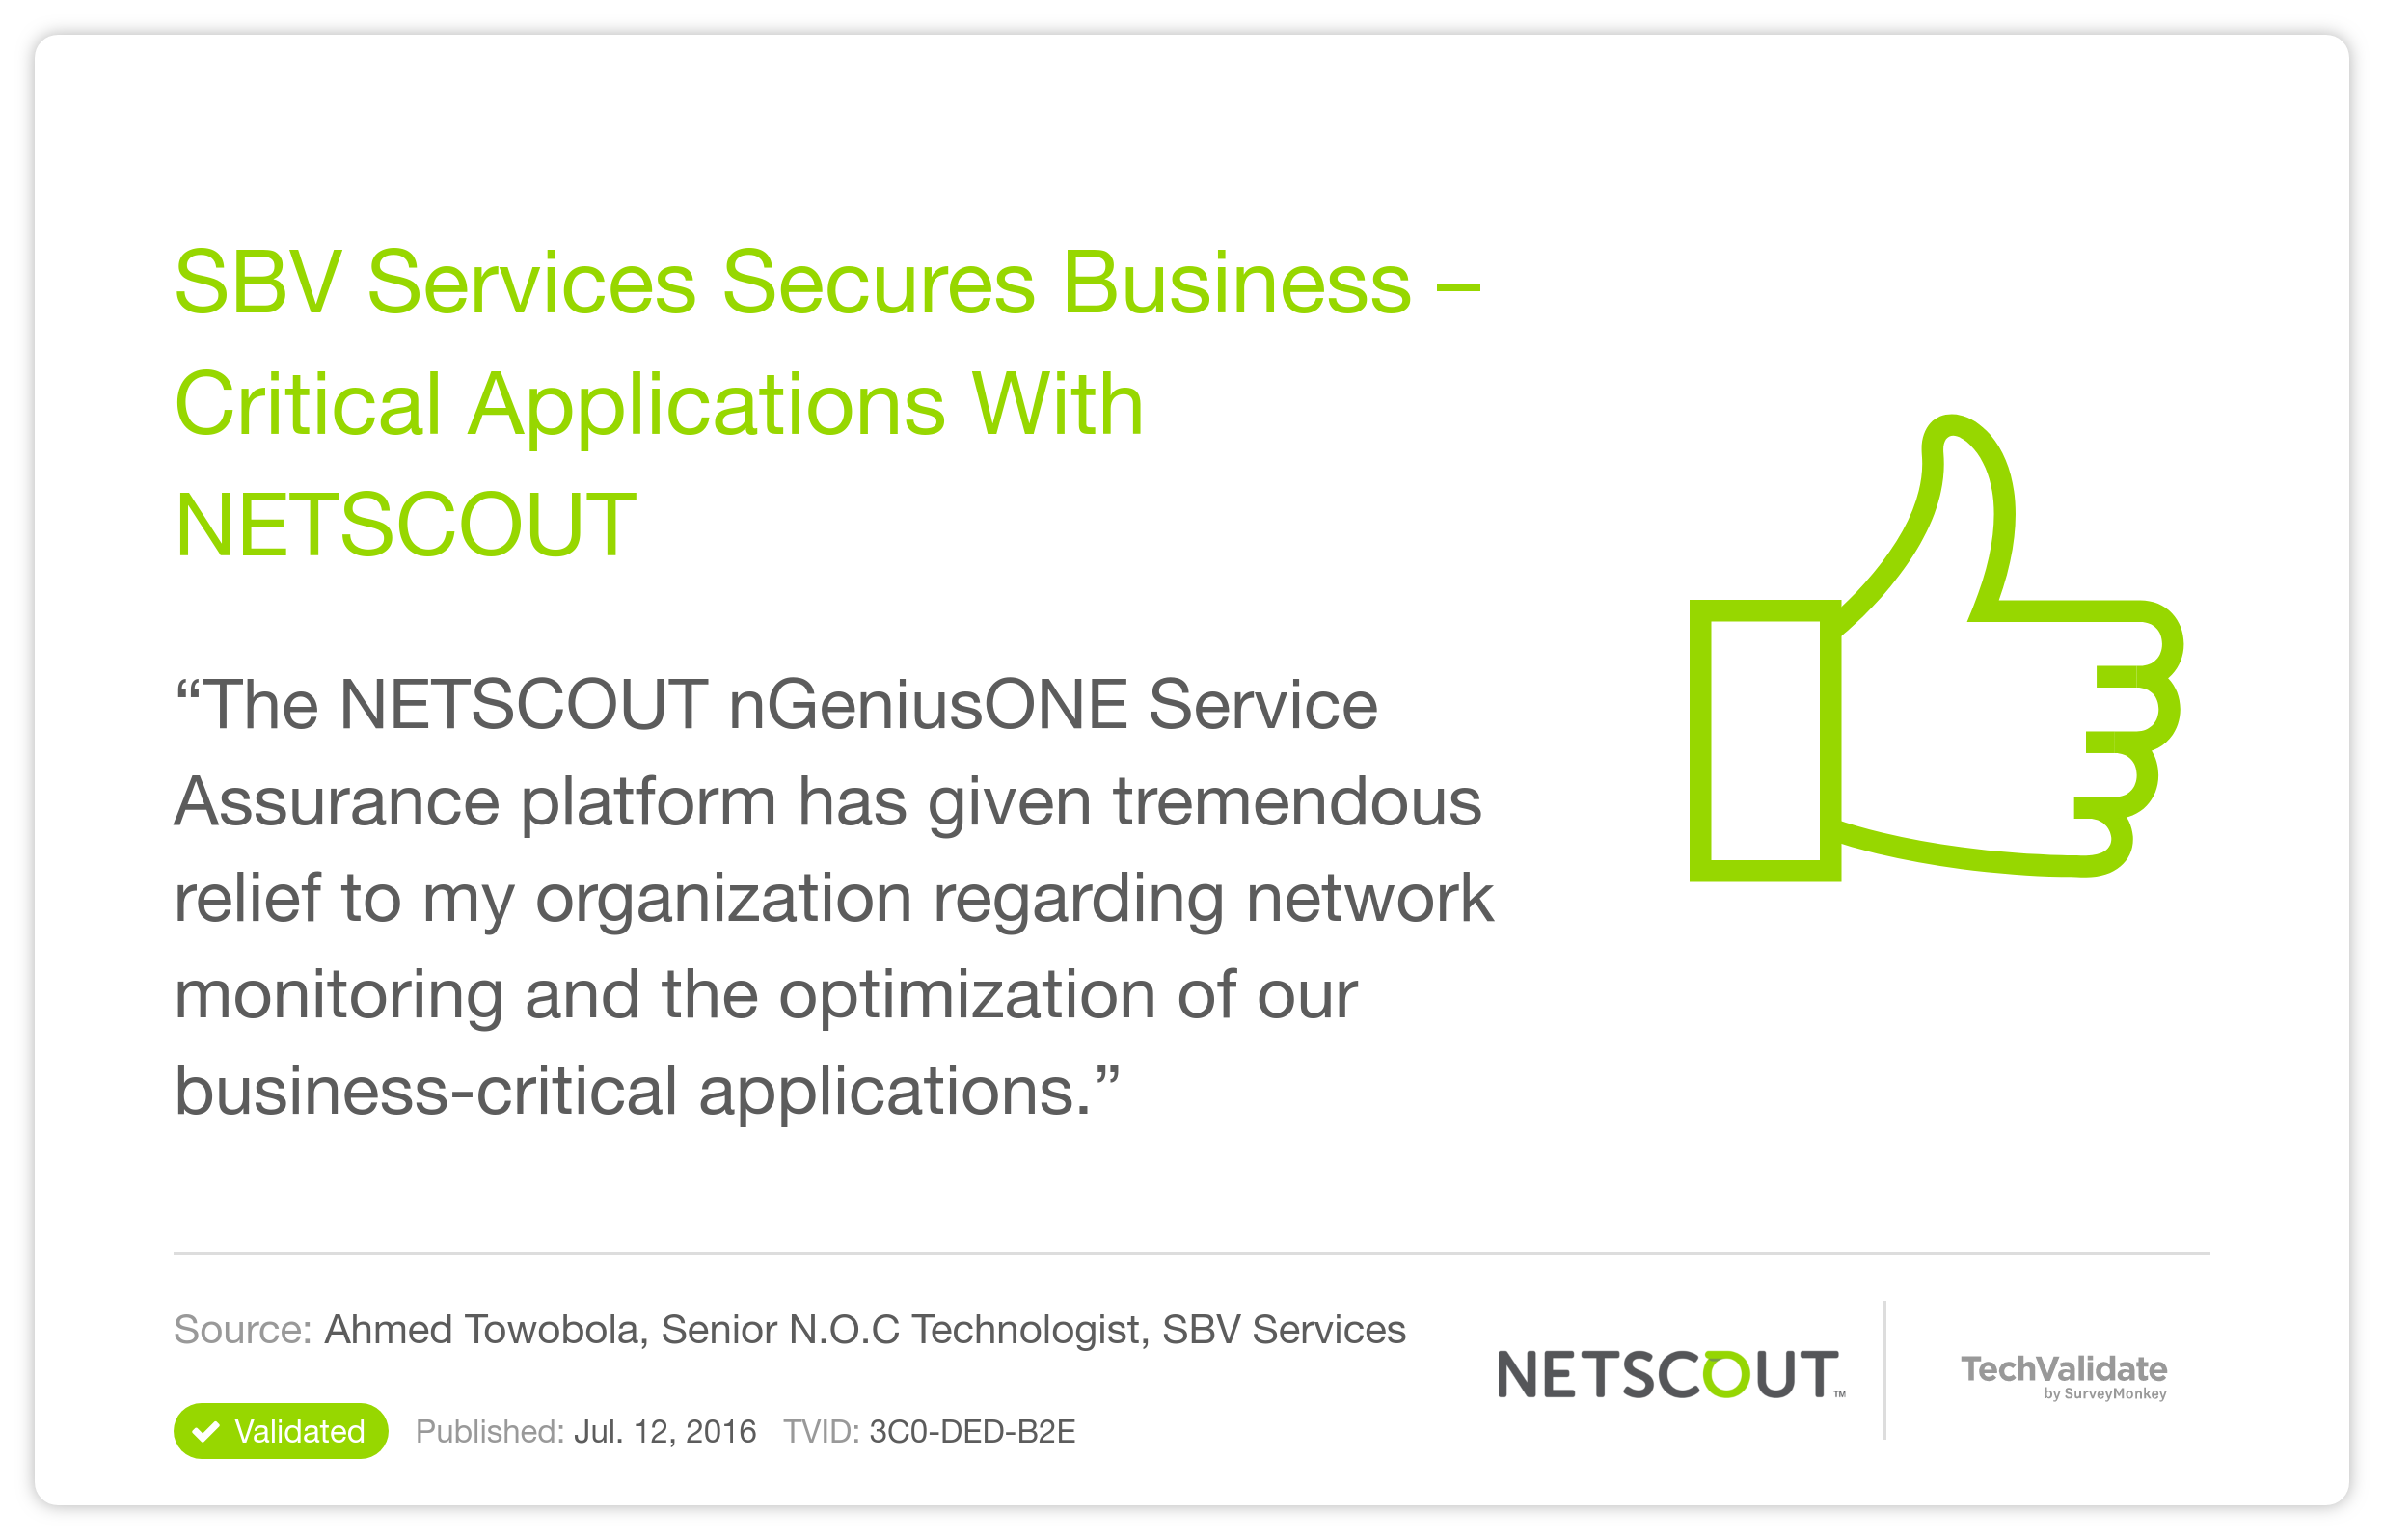 SBV Services Secures Business-Critical Applications With NETSCOUT